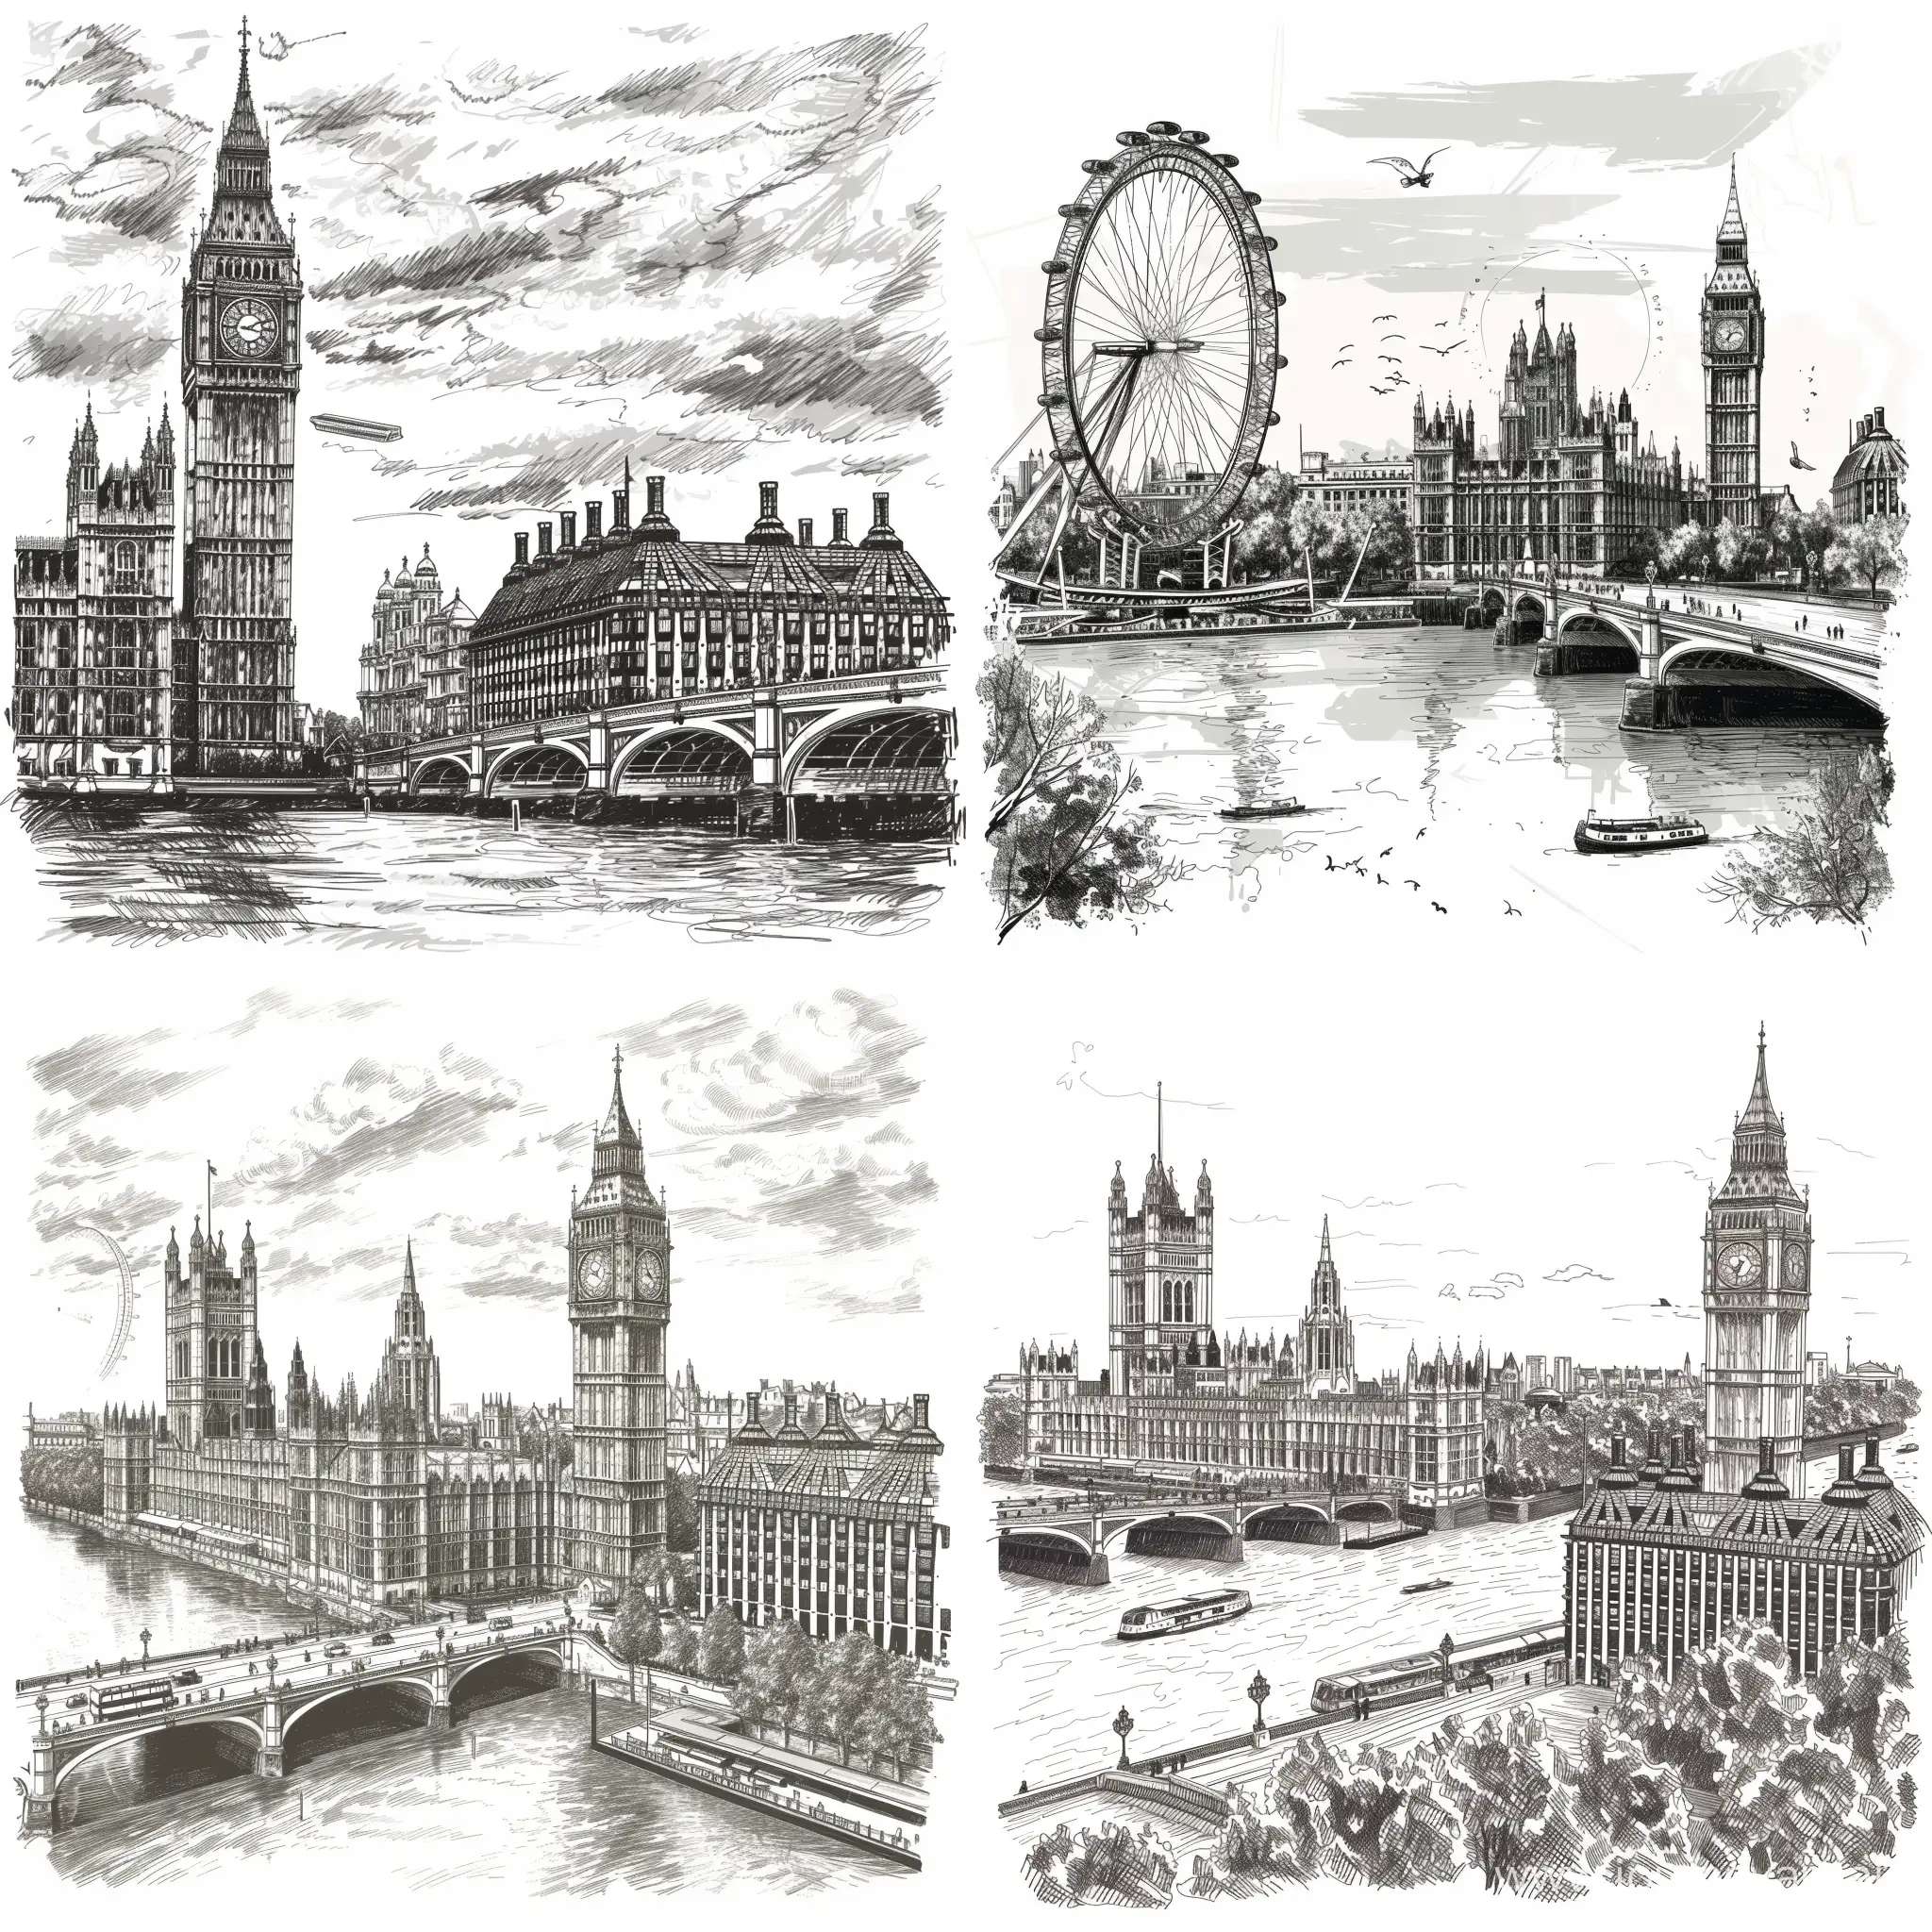 London-Landmarks-Monochrome-Sketch-Iconic-Tourist-Attractions-in-HighQuality-Detail